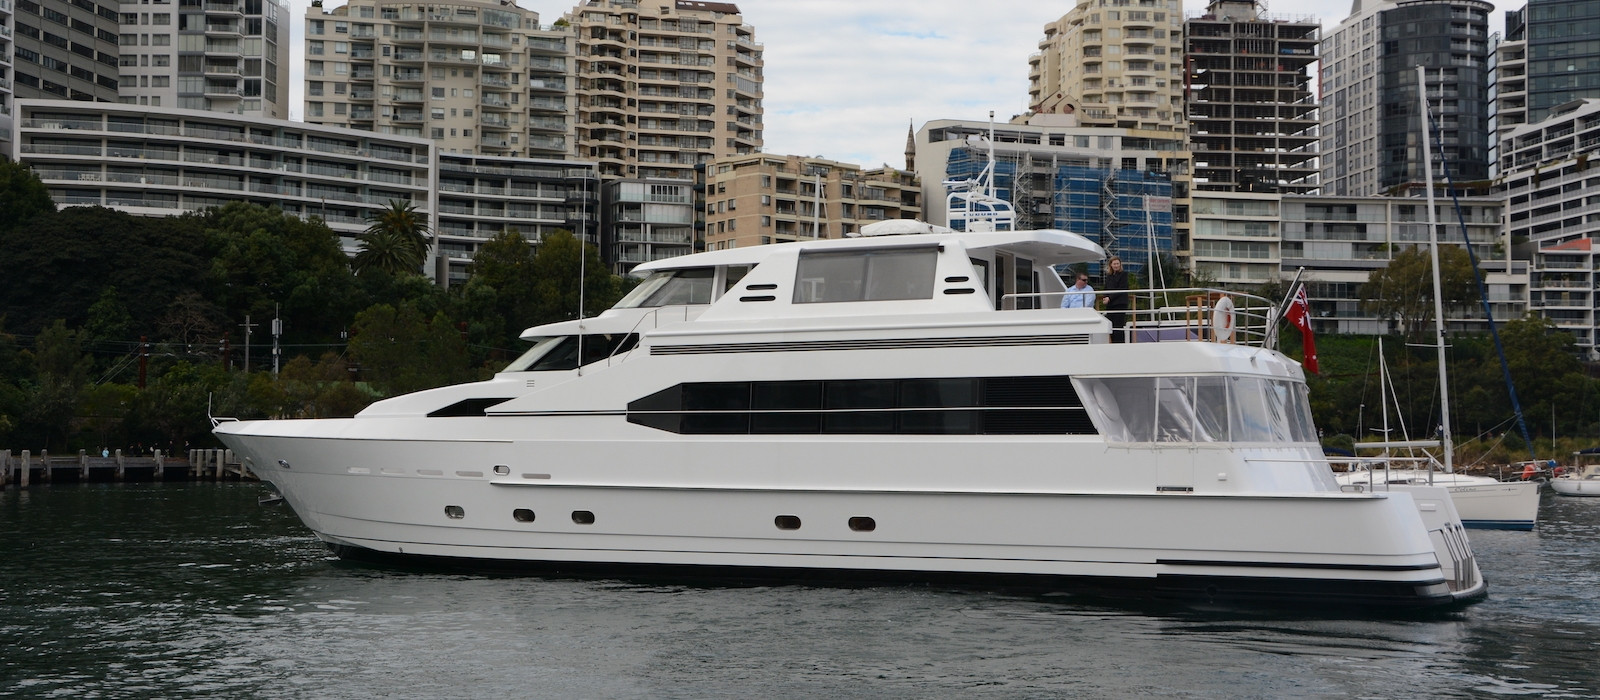 yacht hire durban prices